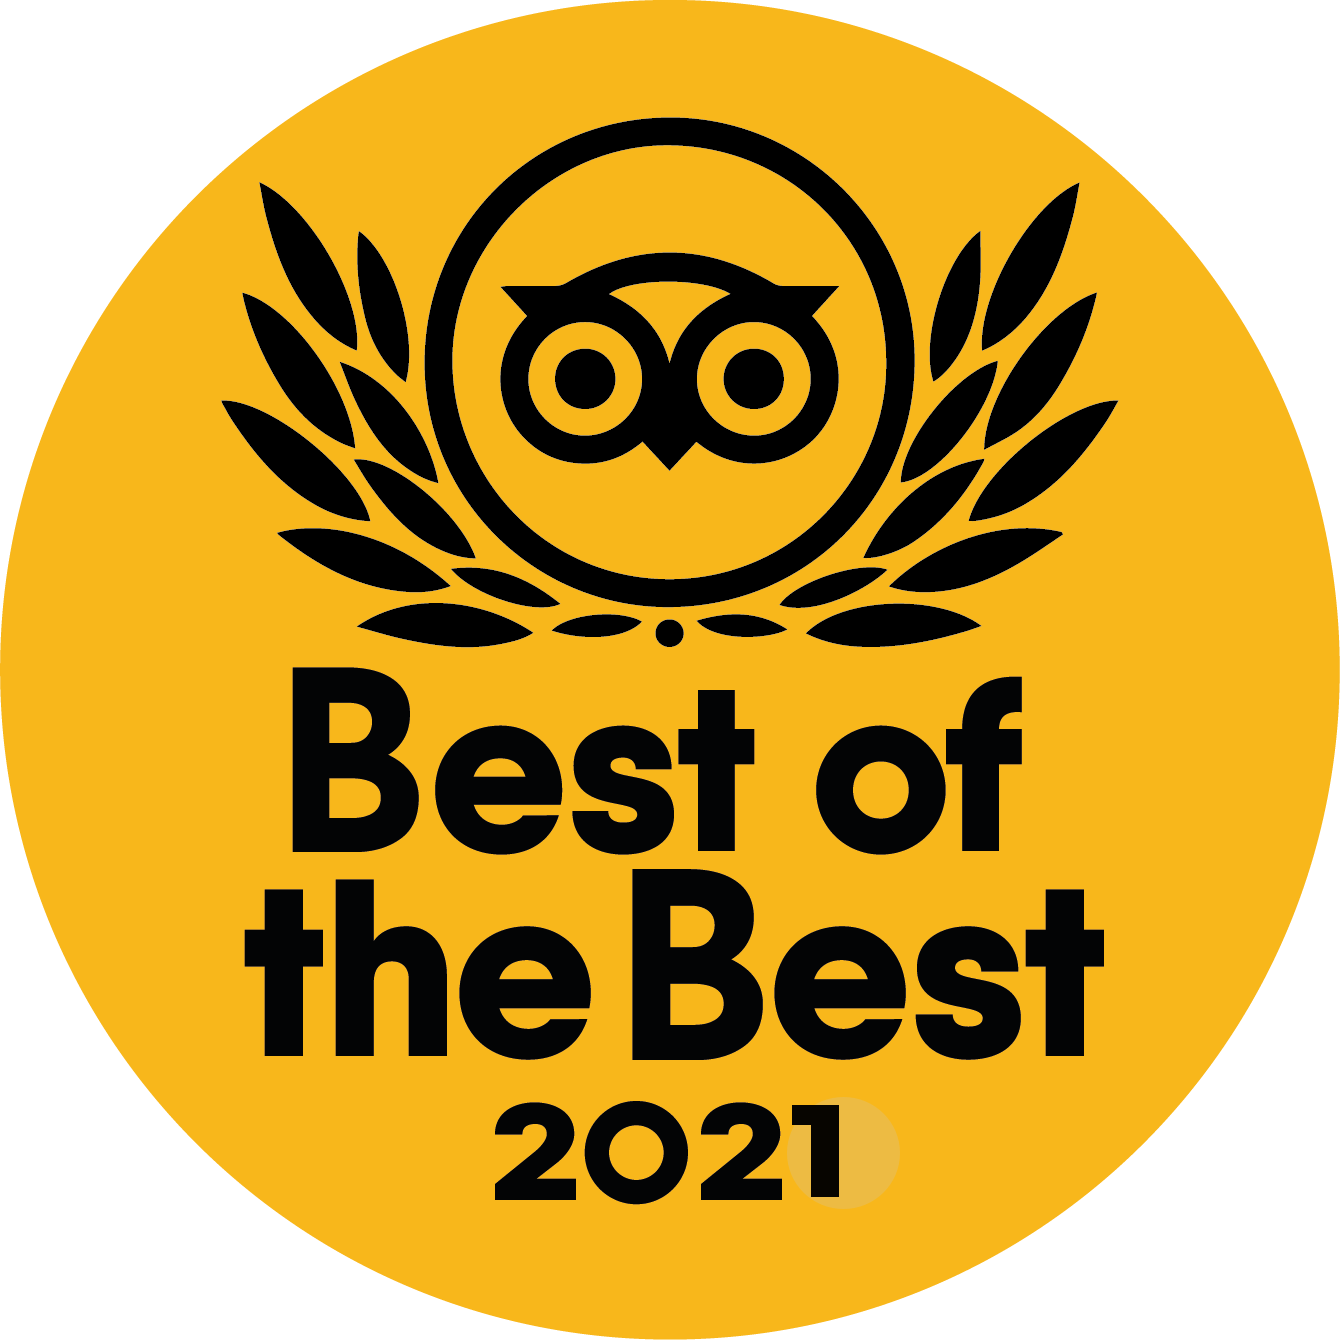 Travellers’ Choice “Best of the Best” 2021